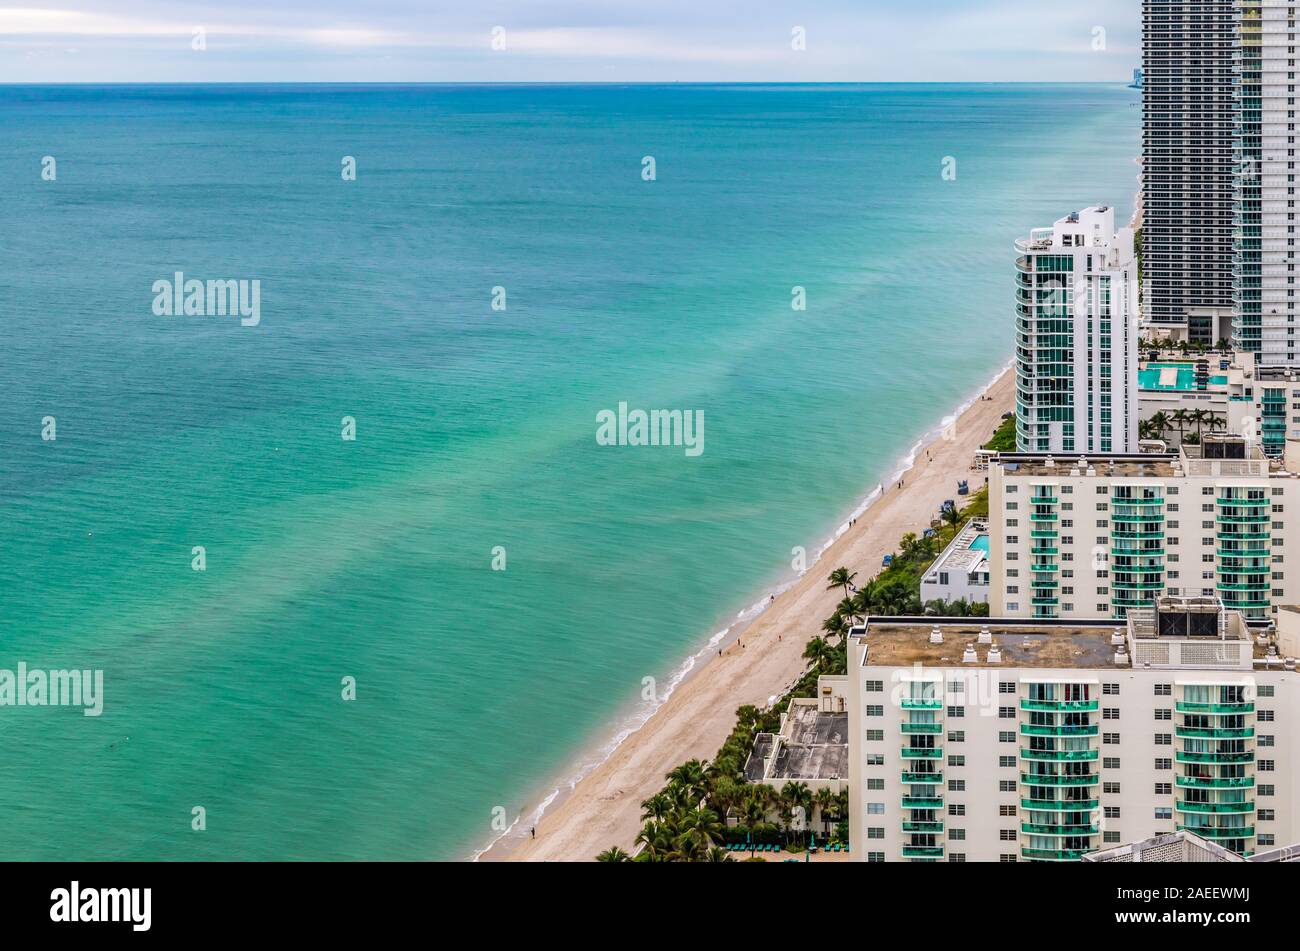 Aerial view of Hollywood beach, blue ocean and skyscrapers along the coastline of Ft Lauderdale, Florida. Stock Photo